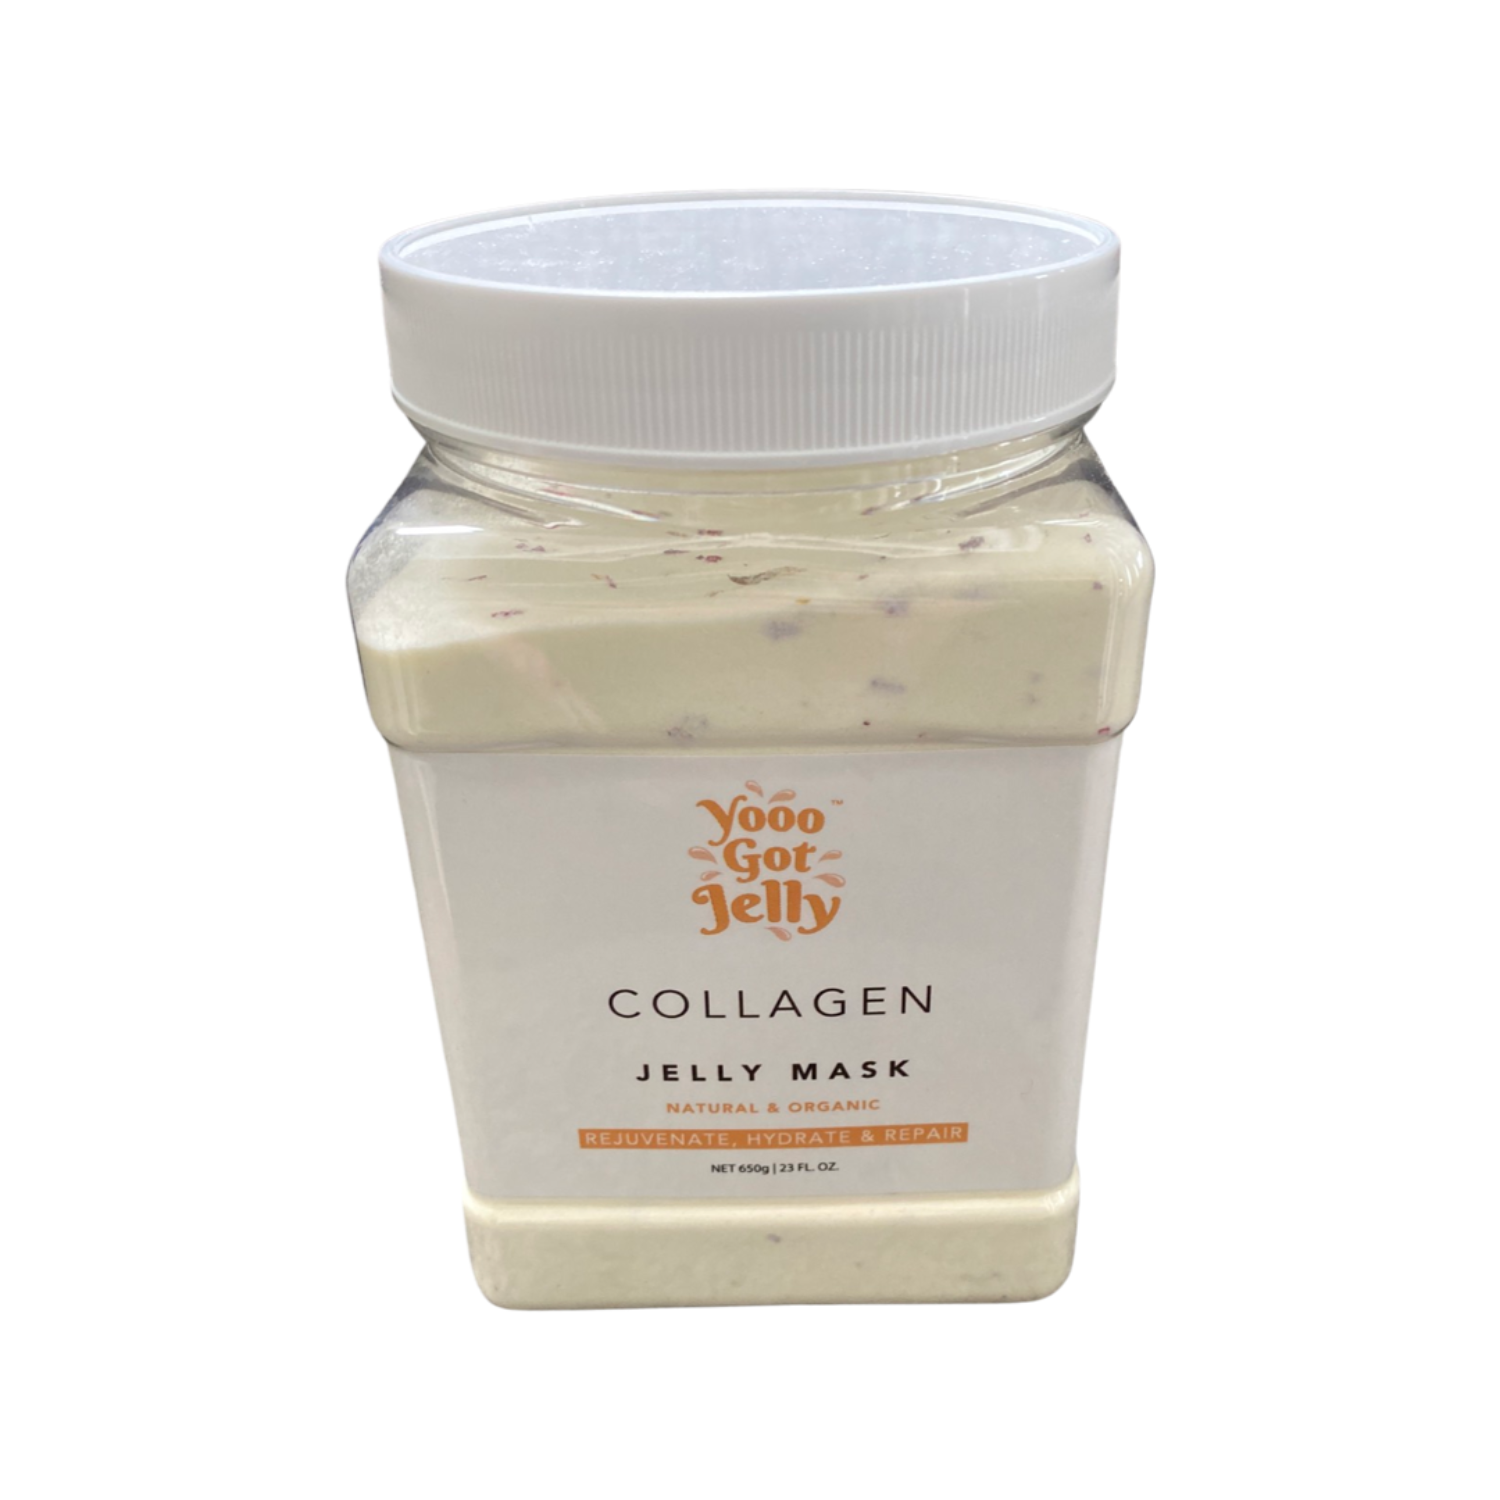 COLLAGEN JELLY MASK - Anti-Aging